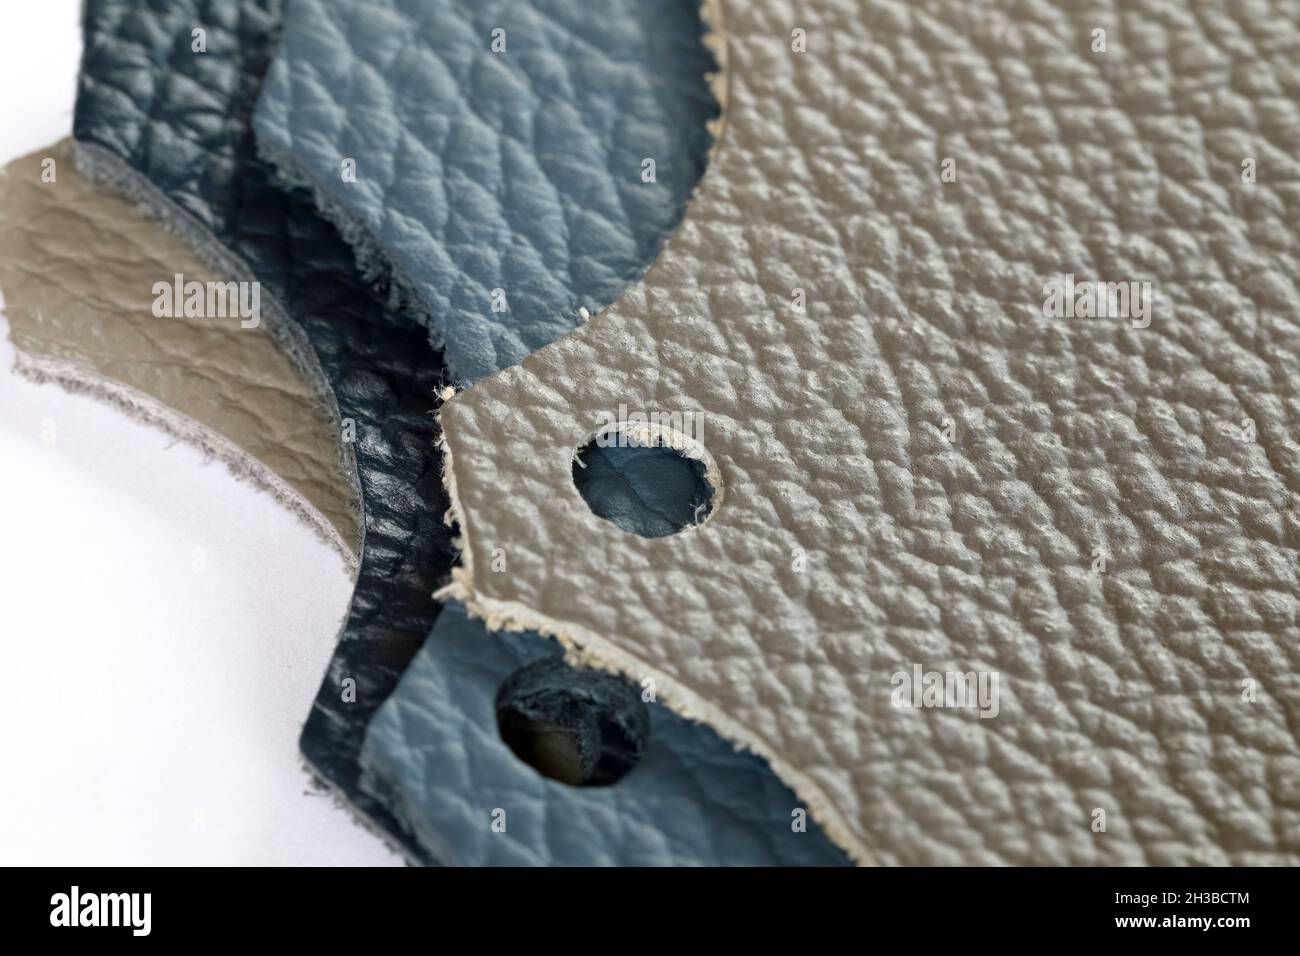 Natural leather upholstery samples are shown up close. Stock Photo